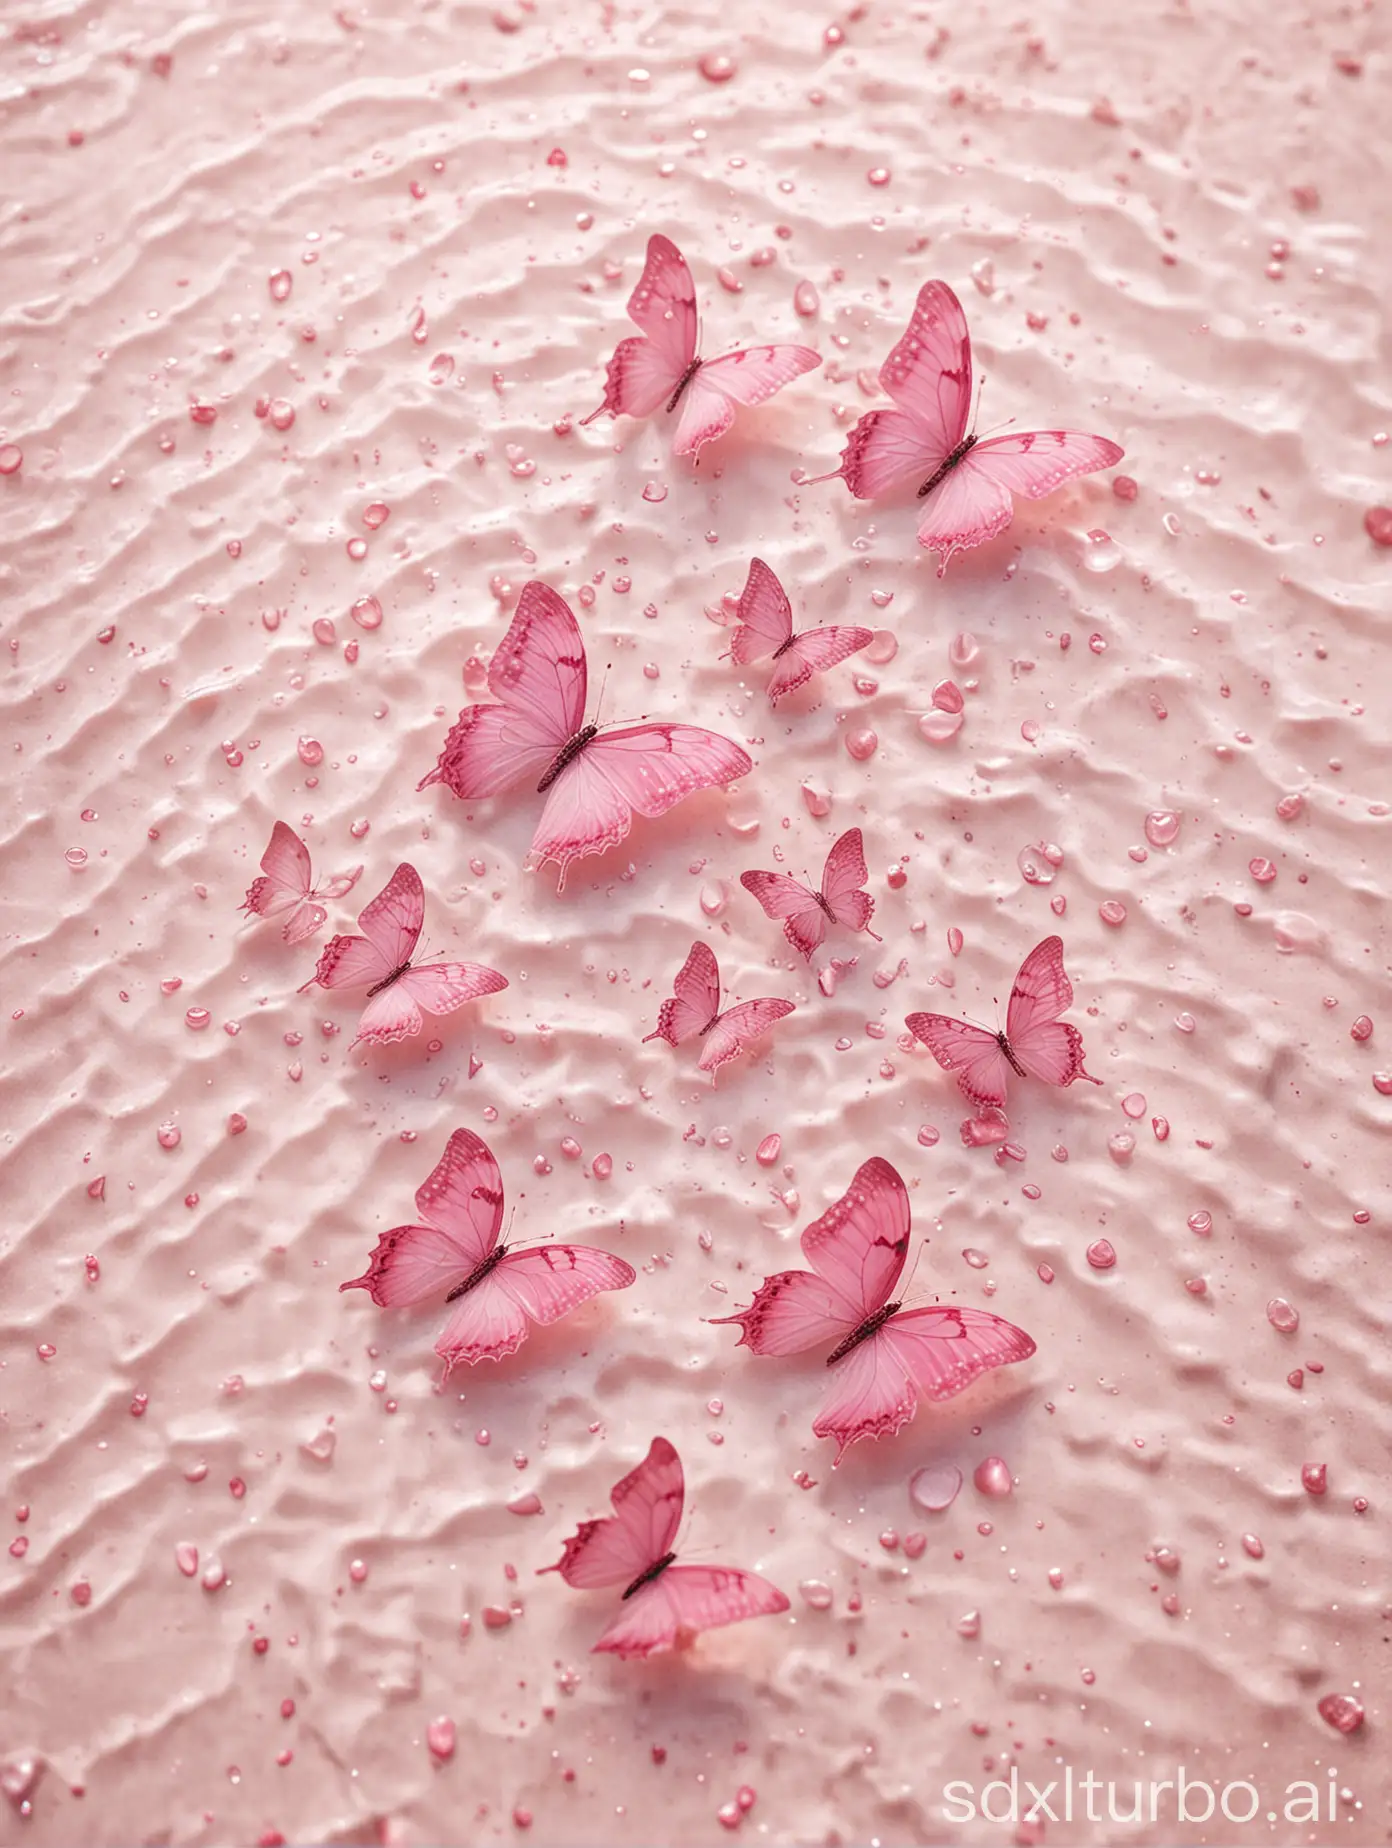 White sand beach, top view, underwater, a group of pink transparent butterflies, minimalism, wide, Gaussian blur, sparkling bright ripples, light pink tint, clear.